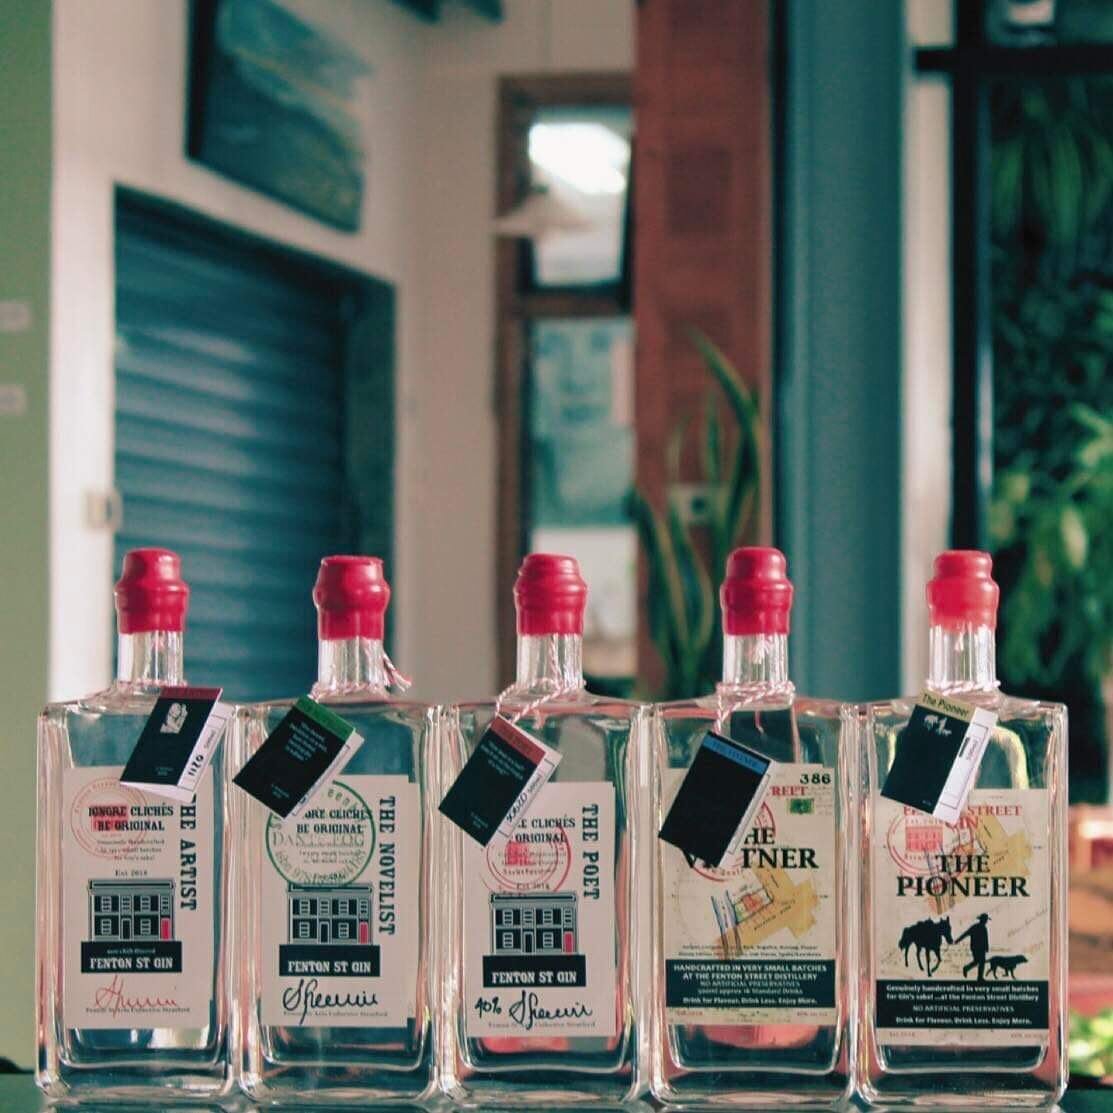 @fentonstdistillary hand make gin in very small batches in their distillery in Stratford.  We recommend the taster pack for the gin lovers so you can try a selection, get your gin fix via their website 🍸

Here&rsquo;s what the team have to say: 

 &